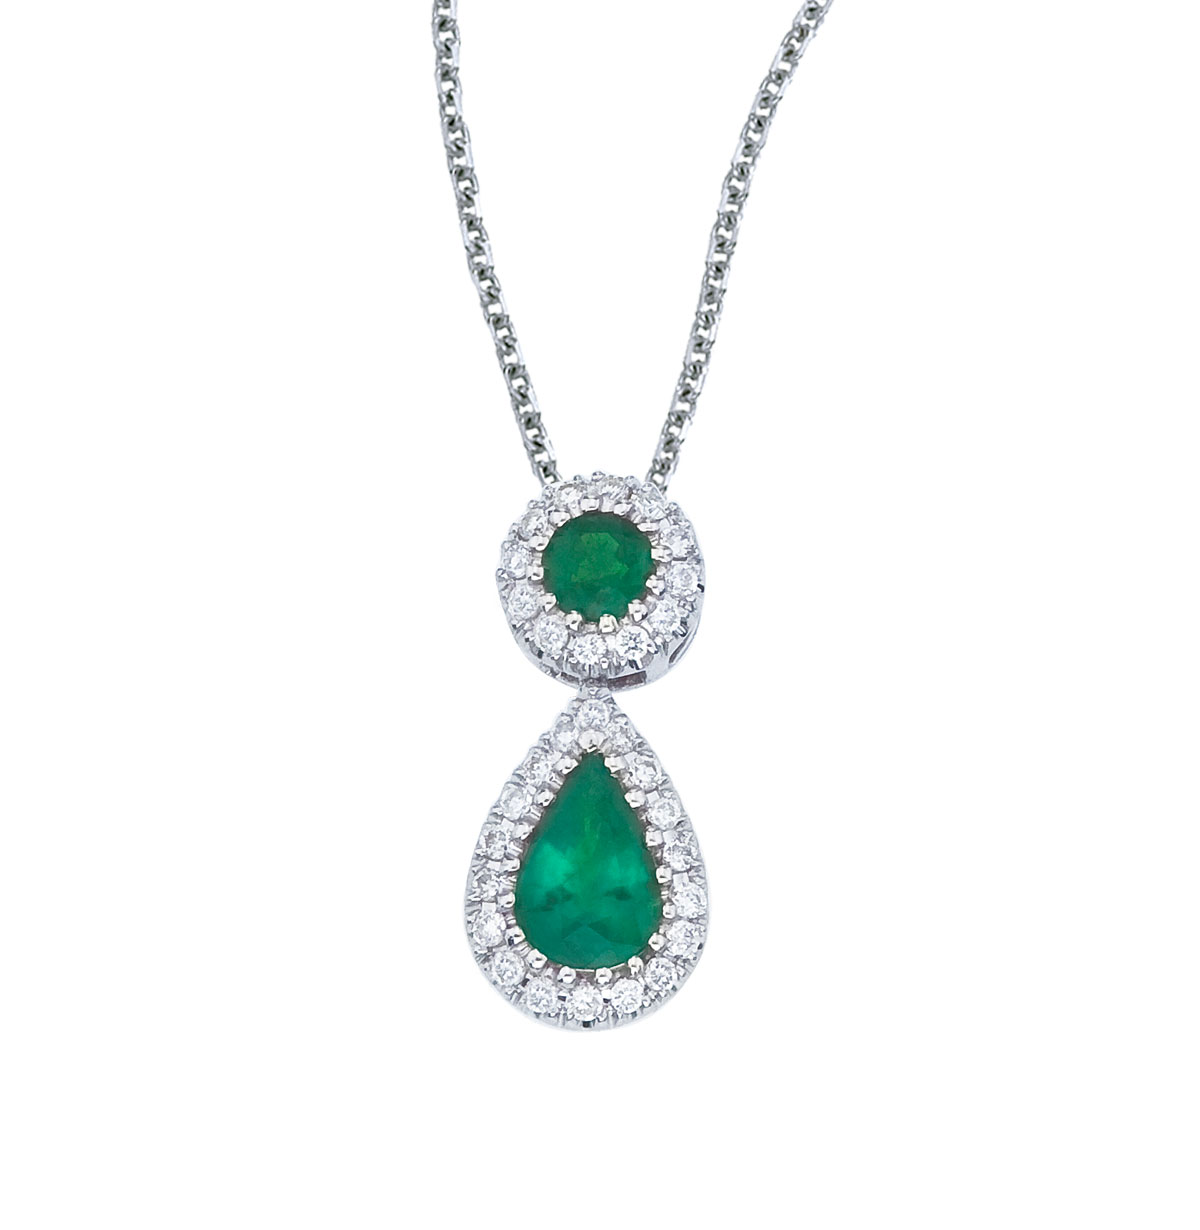 This beautiful 14k white gold pendant features a 6x4 mm emerald dangling from a 2.5 mm round emer...